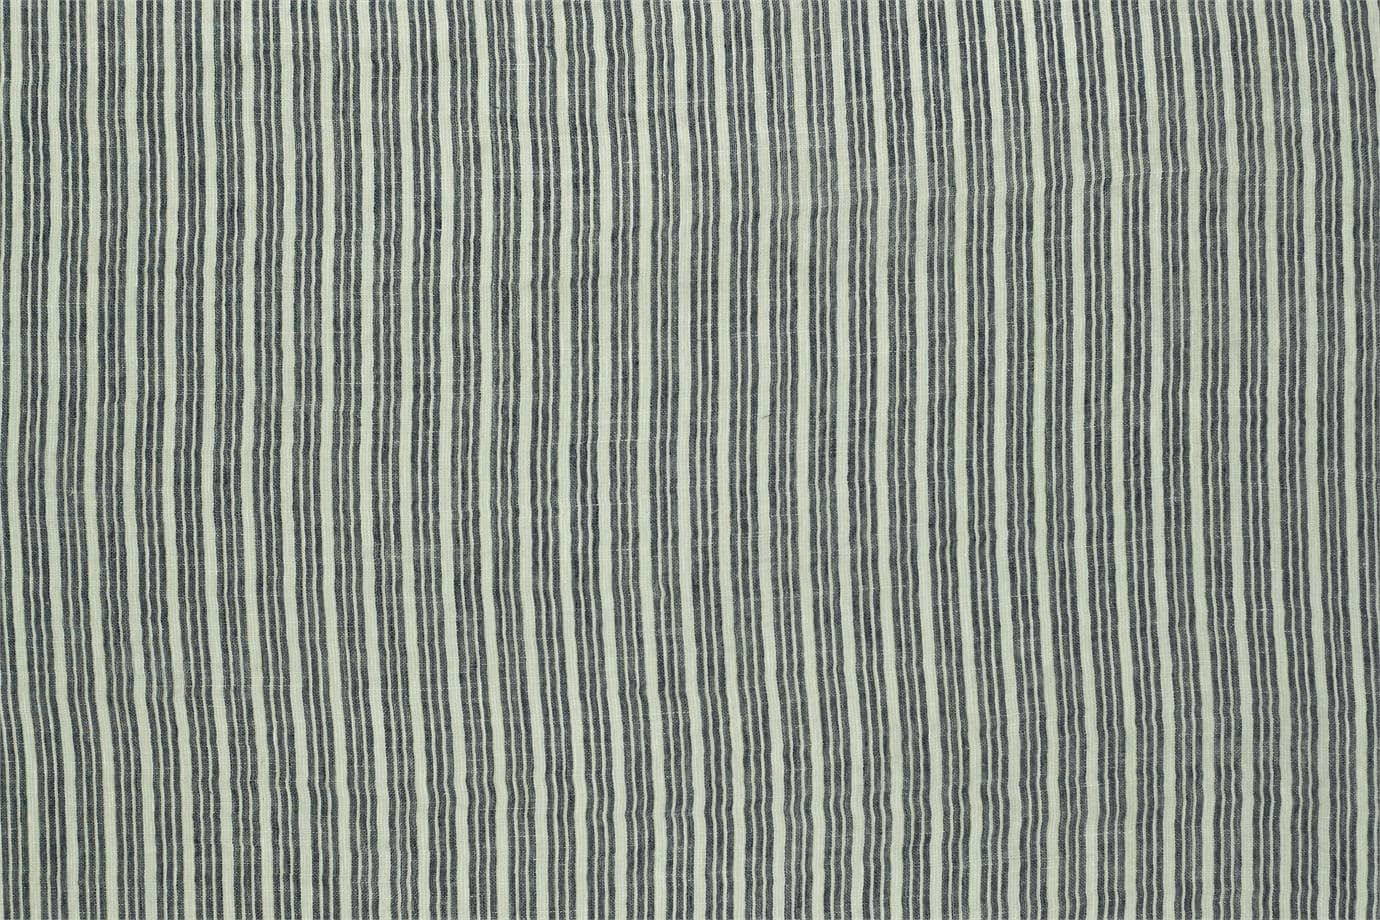 J3435 PUFFO 004 Pavone home decoration fabric